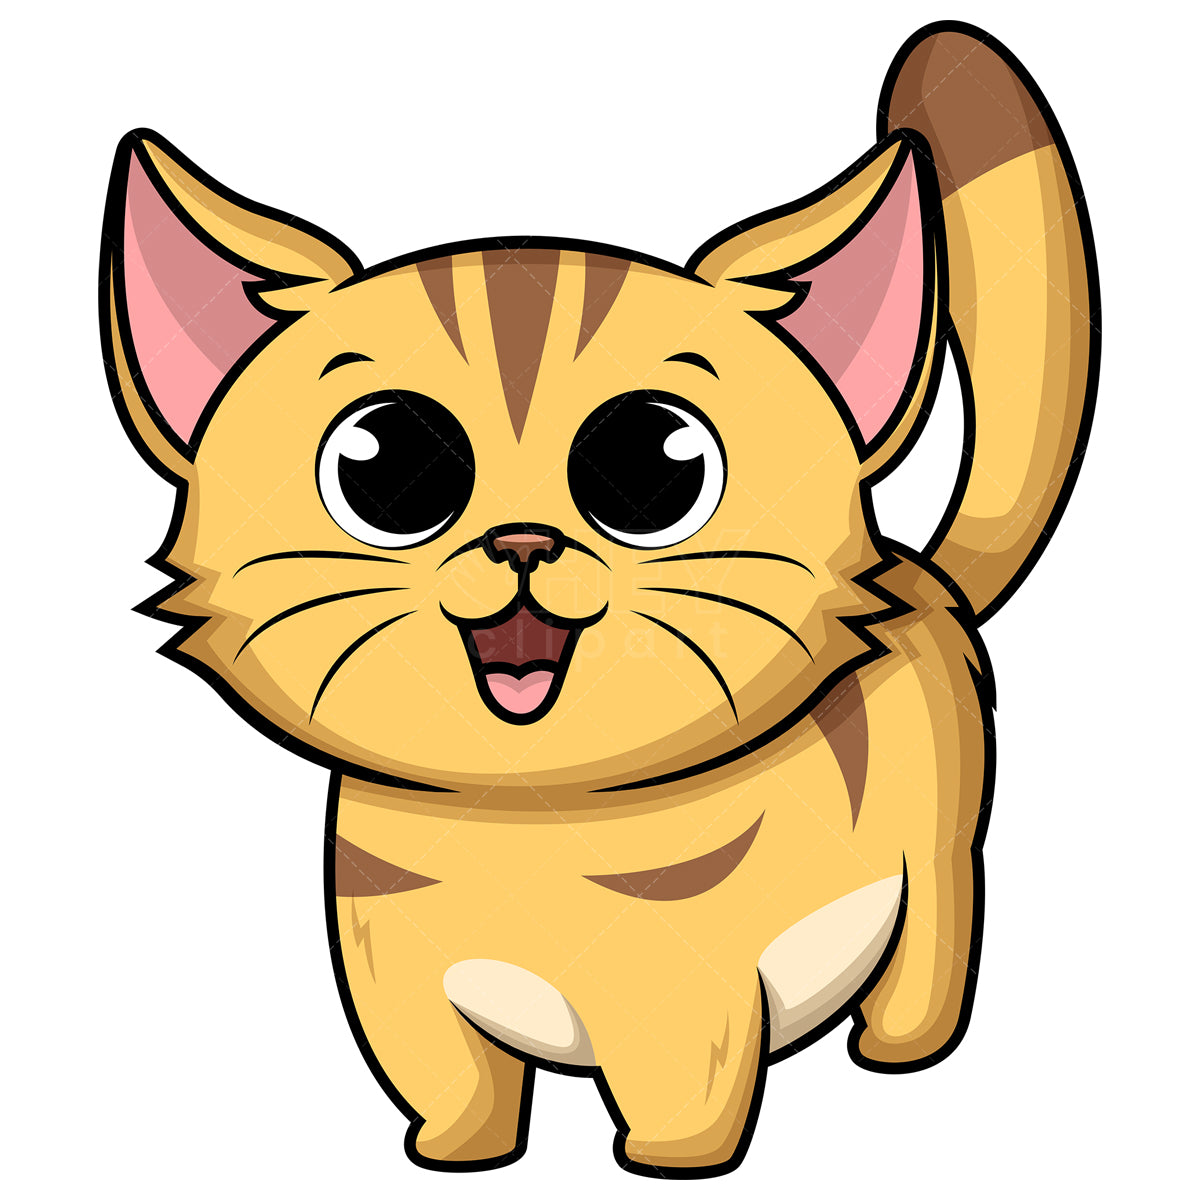 Royalty-free stock vector illustration of  a cute baby kitten.